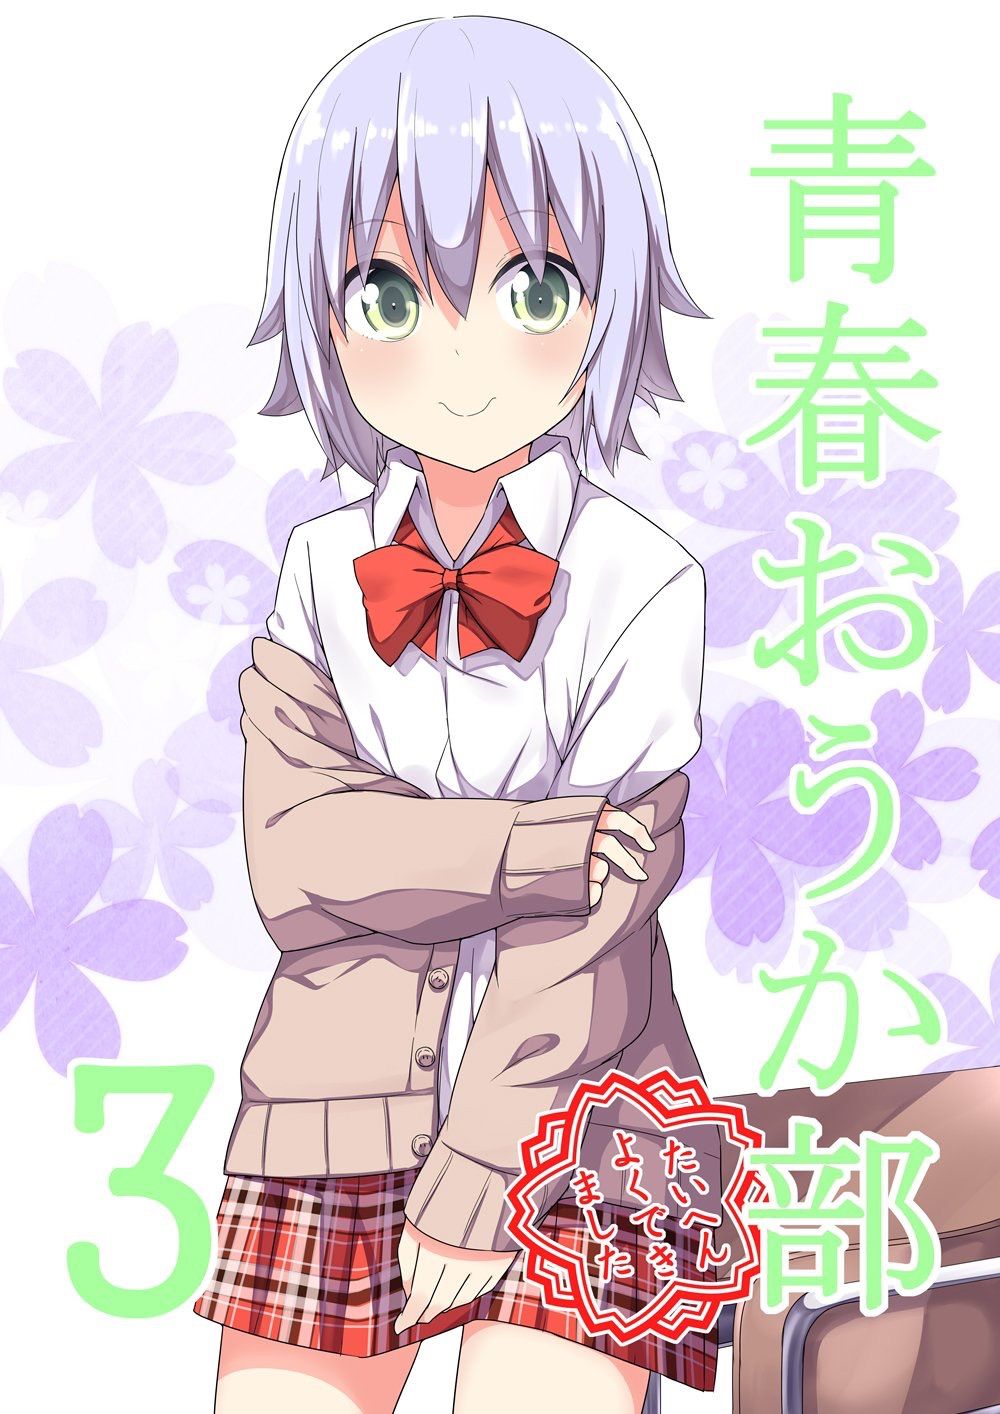 【Image】"Gavril dropout" the cover of the author's thin book etch wwwwwwwwww 8